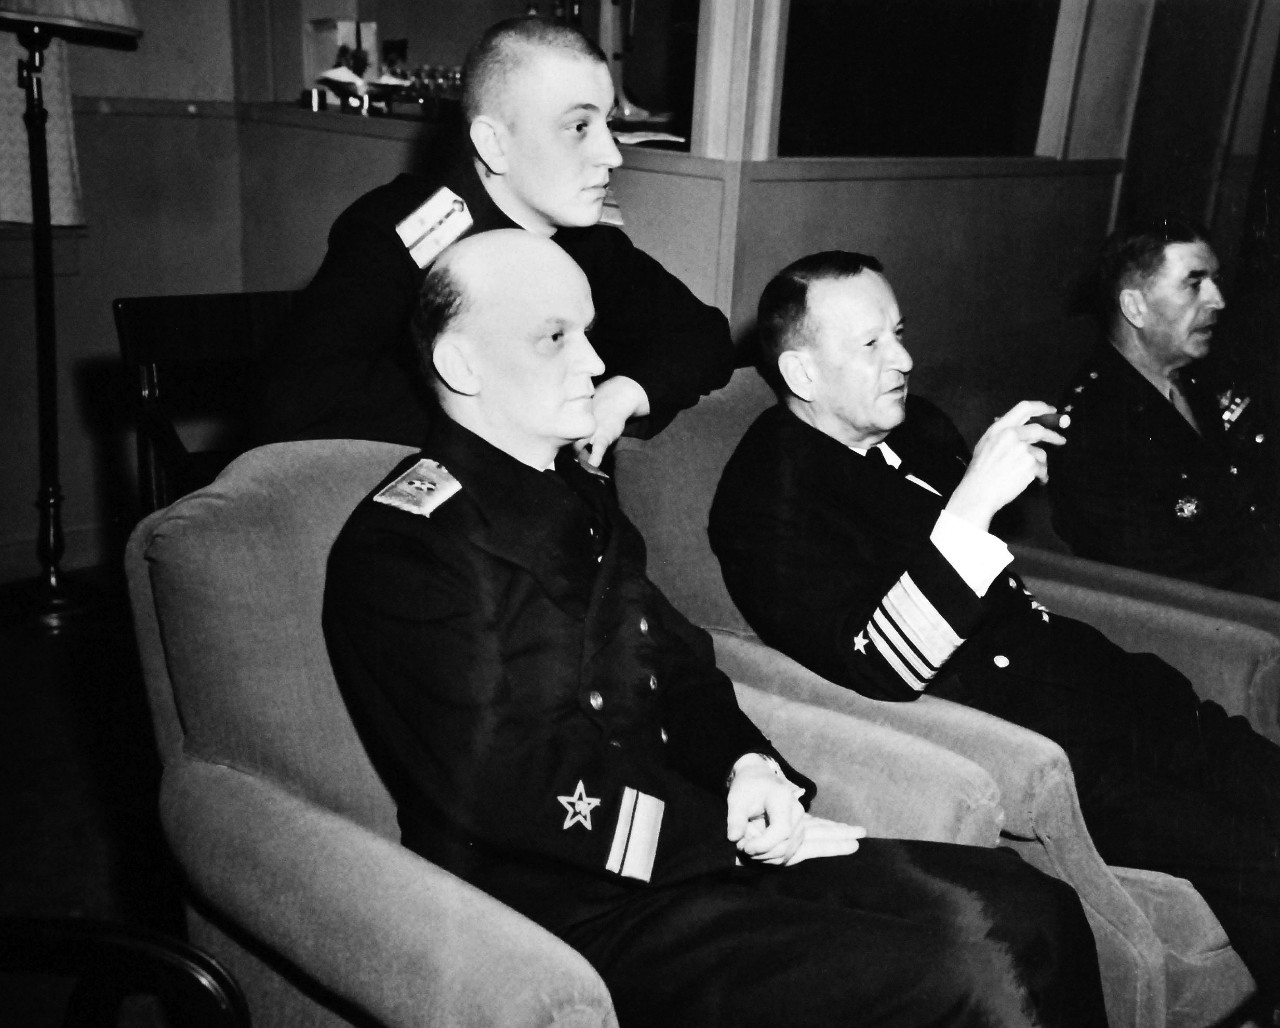 80-G-342180:  Naval Operating Base, Adak, Alaska, July 1945.   Soviet Rear Admiral Popov, Red Army visits Adak, Alaska.  Party at Rear Admiral R.A. Wood’s quarters, 6 July 1945.  Left to right:  Rear Admiral Popov, Captain Krivoshekov (interpreter); Vice Admiral Frank J. Fletcher, USN; and Major General Brooks, USA.  Official U.S. Navy Photograph, now in the collections of the National Archives.  (2013/08/21).  